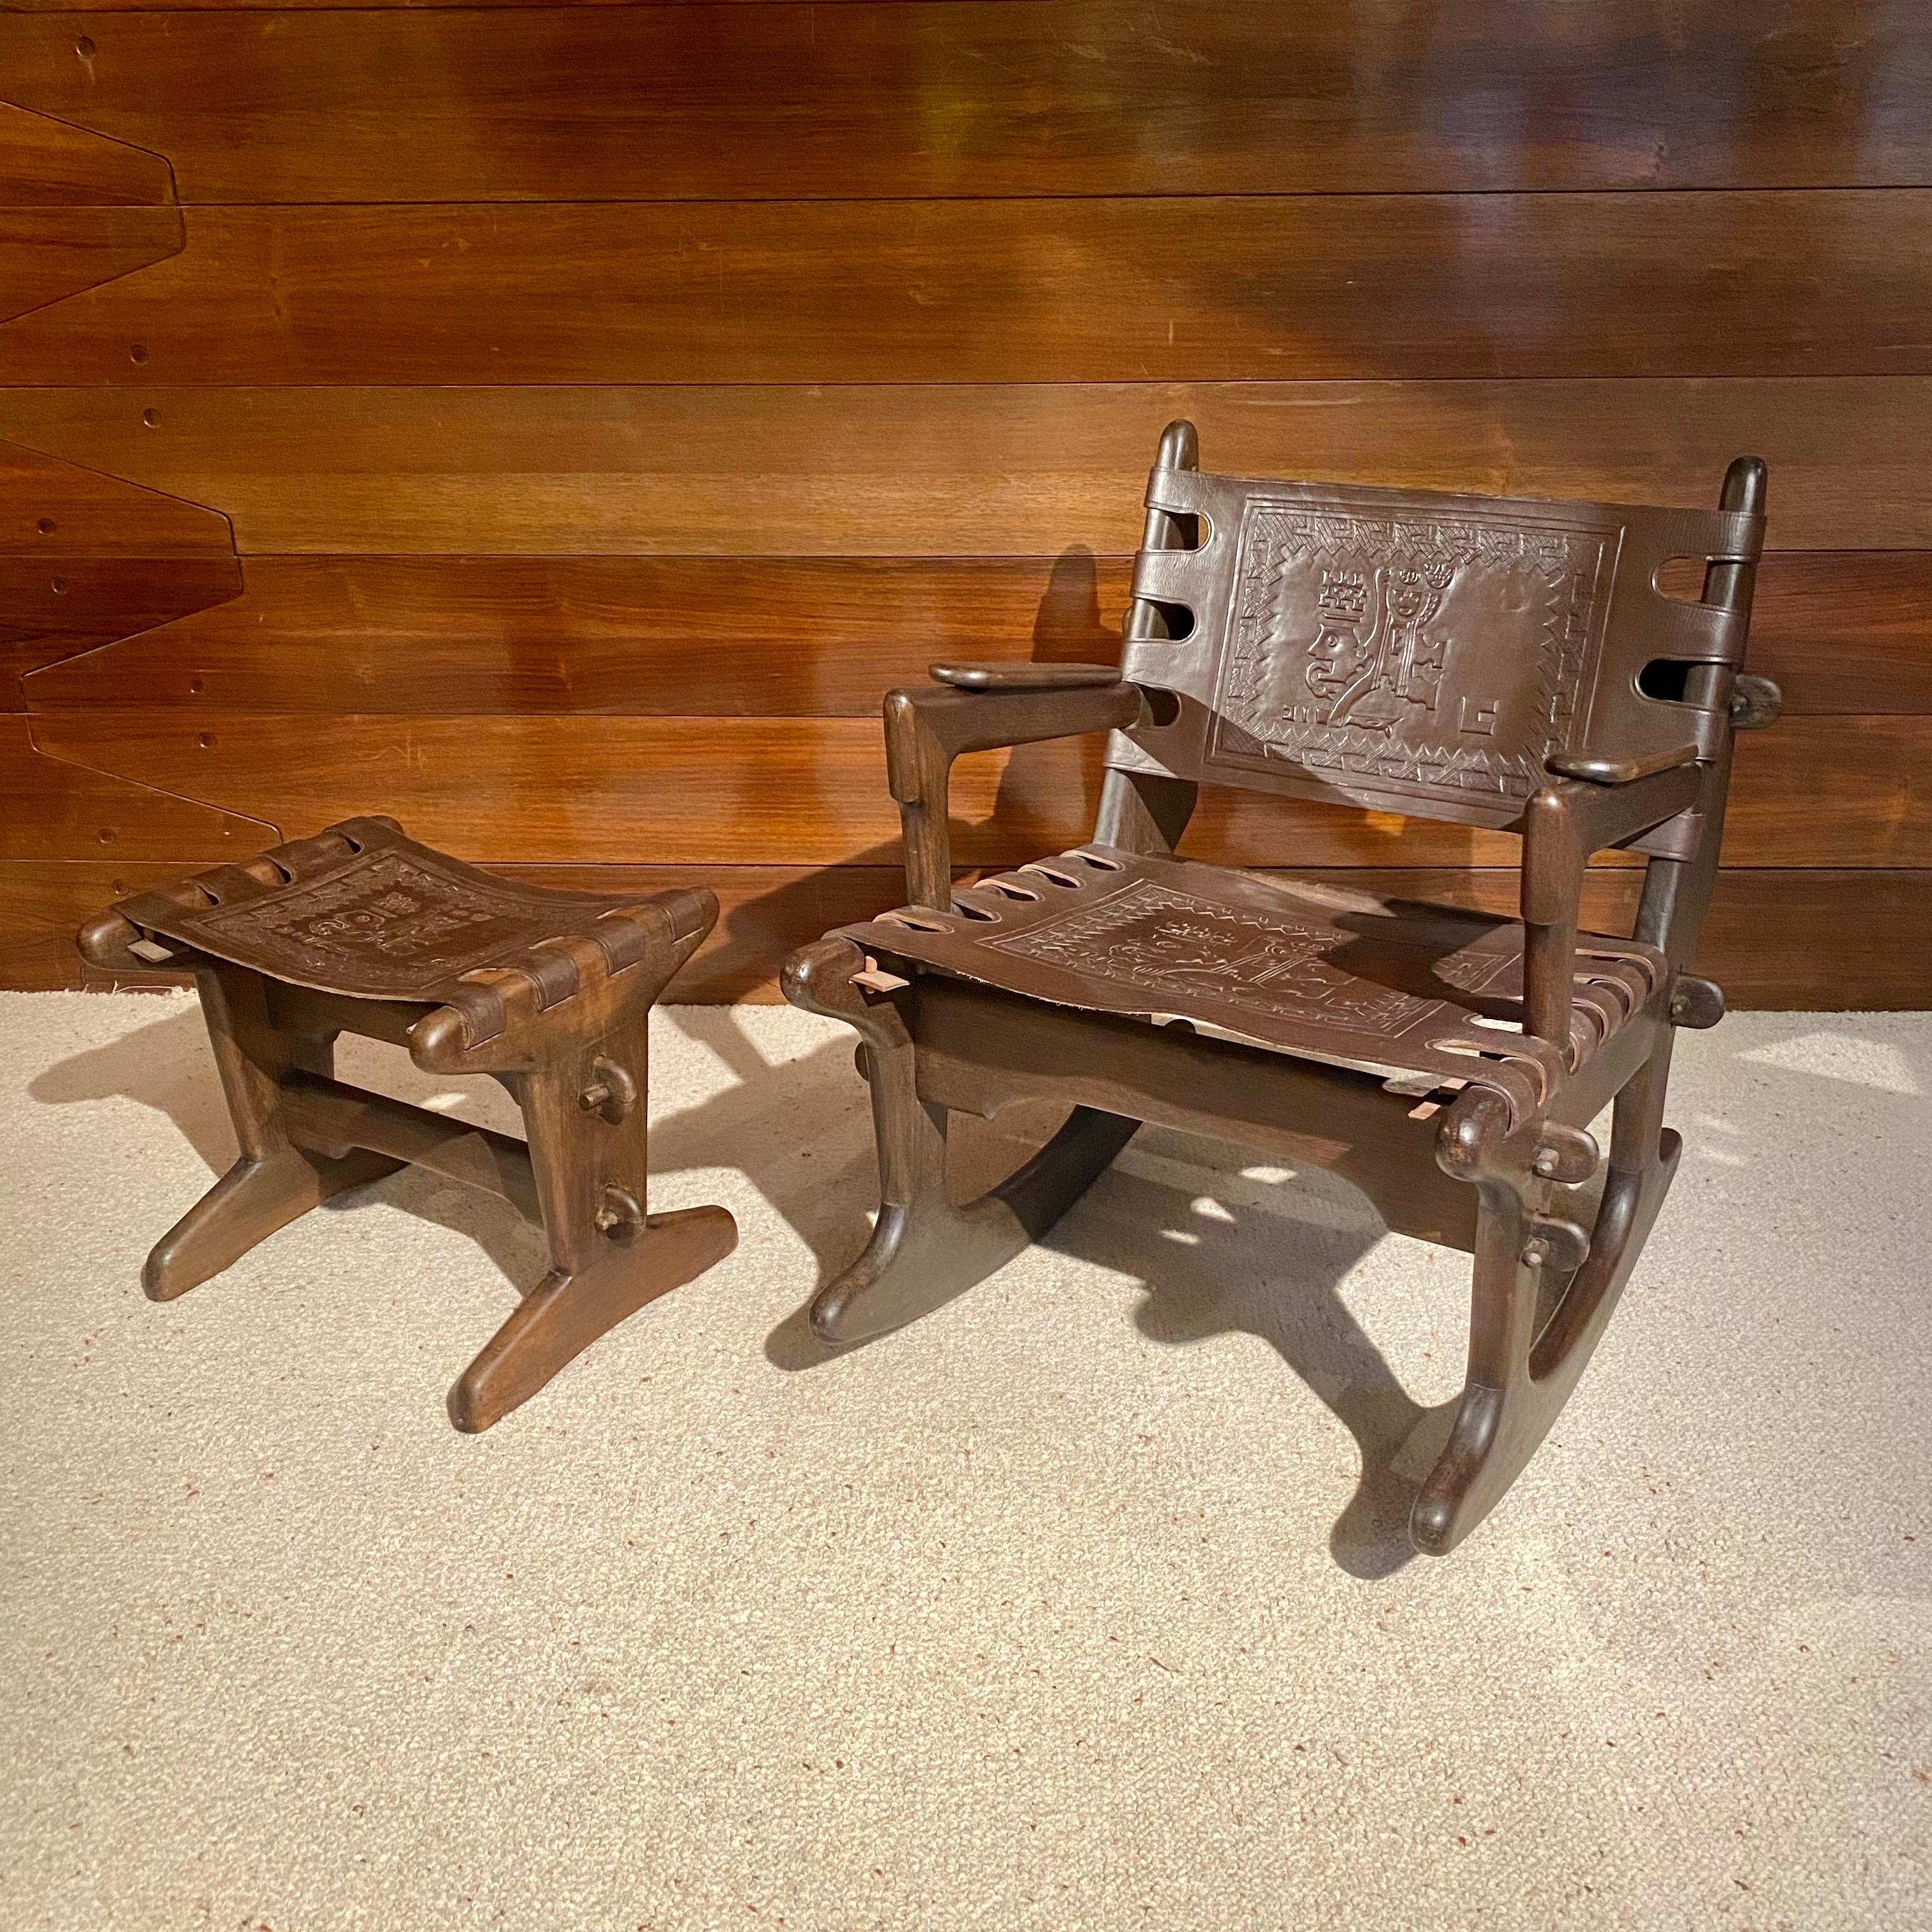 Wood and leather rocking chair and footrest by Angel Pazmino for Meubles De Estilo Ecuador, 1970's.
These pieces features a wooden peg frame with thick sculpted sling leather .
Rocking chair 75cm×60cm×80cm seat height 45cm
Footrest